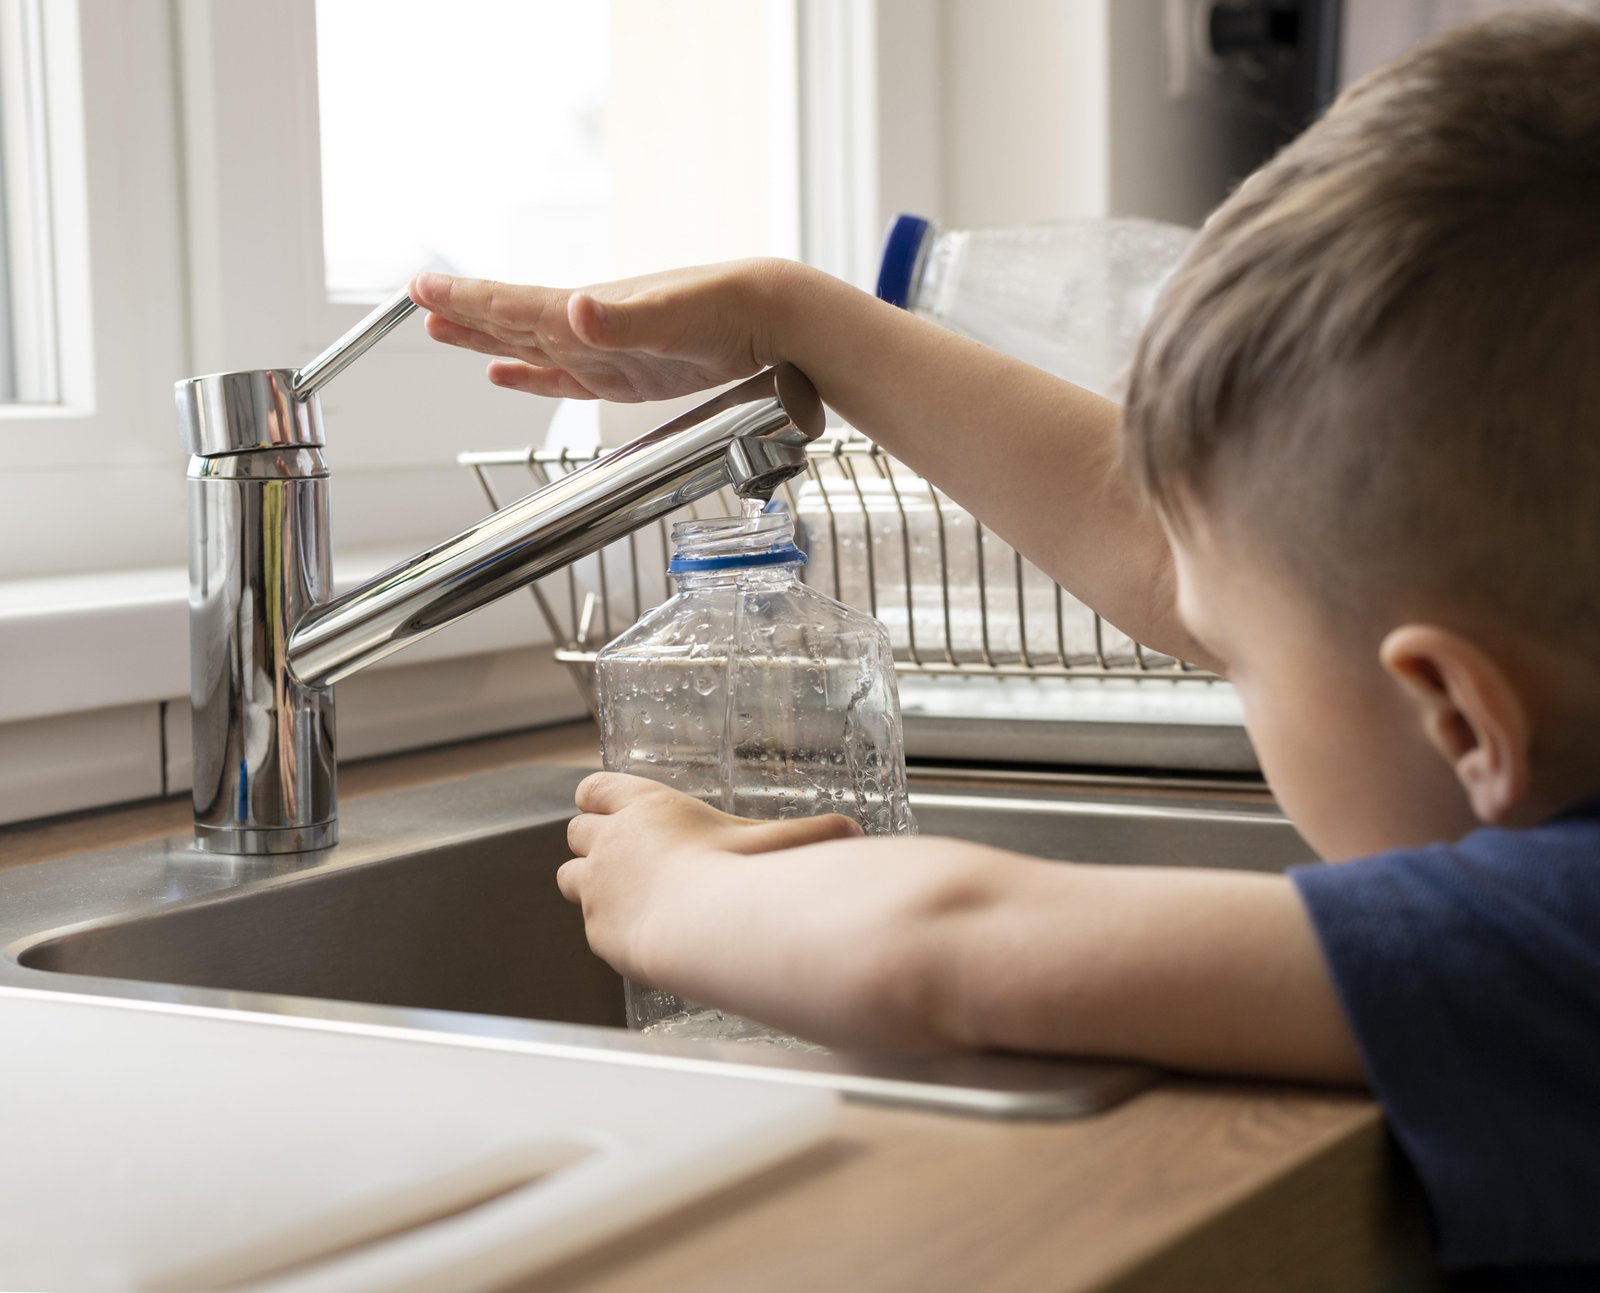 Study Says 129,000 Kids In Chicago Under 6 Exposed To Lead-Contaminated Water